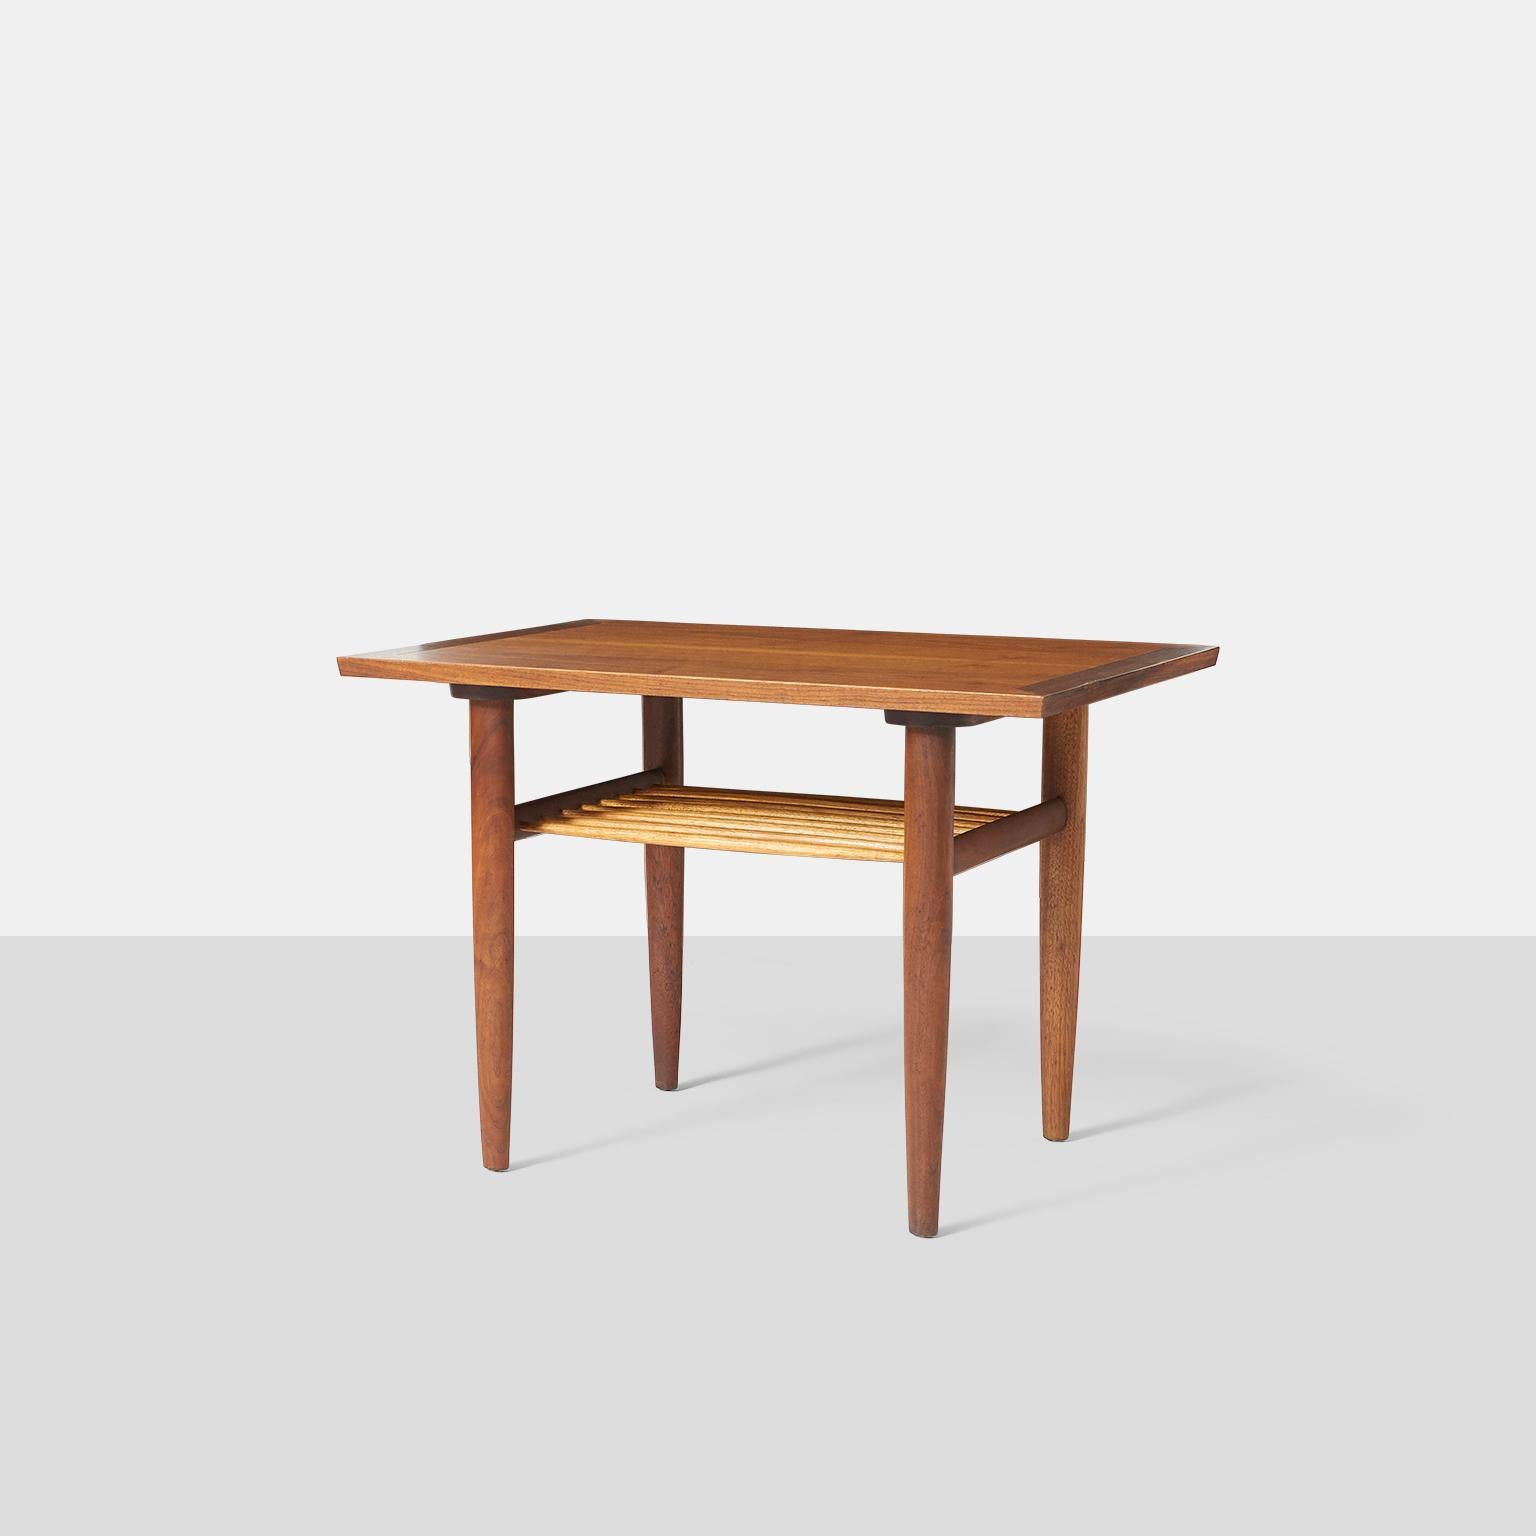 American Pair of Side Tables by George Nakashima for Widdicomb